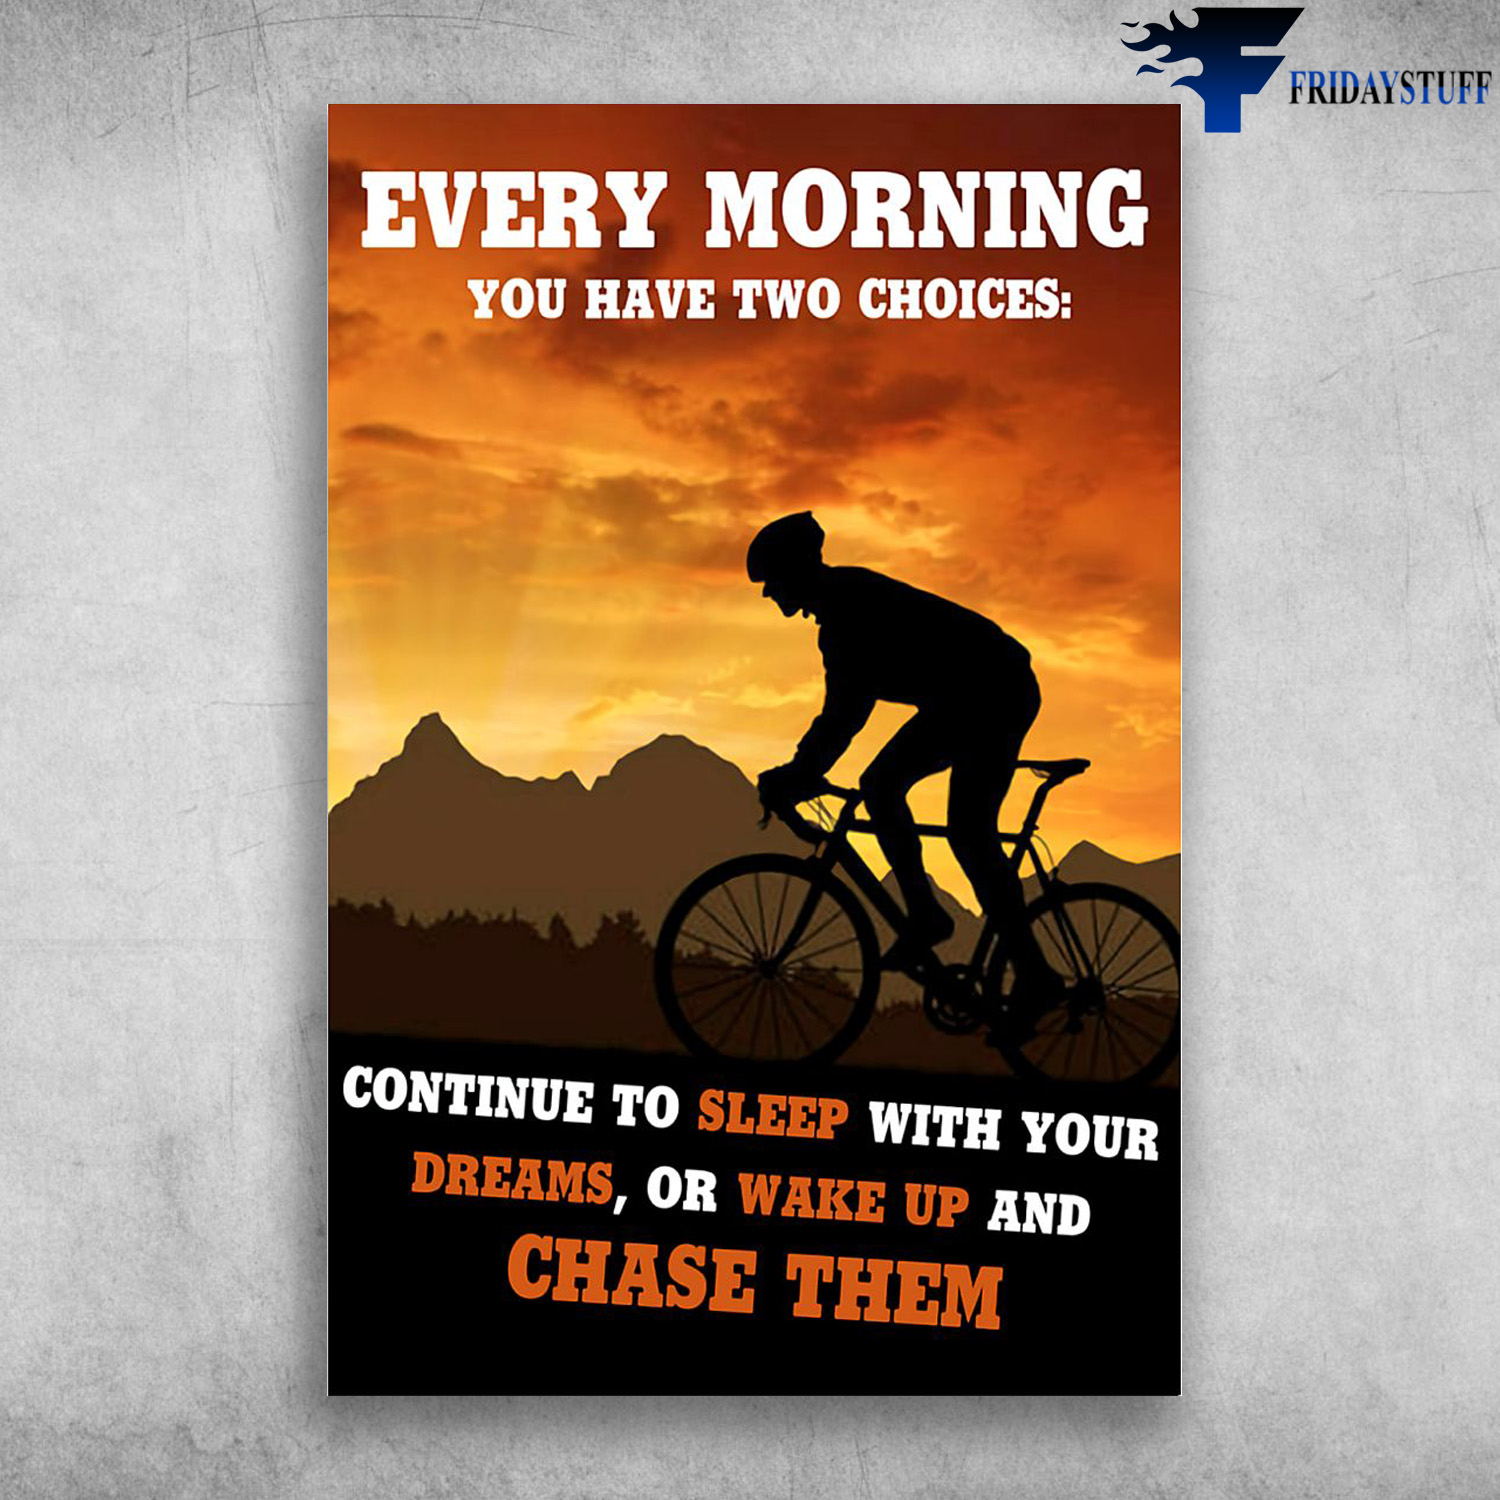 The Man Rides Bicycle Under The Dawn Light - Every Morning You Have Two Choices